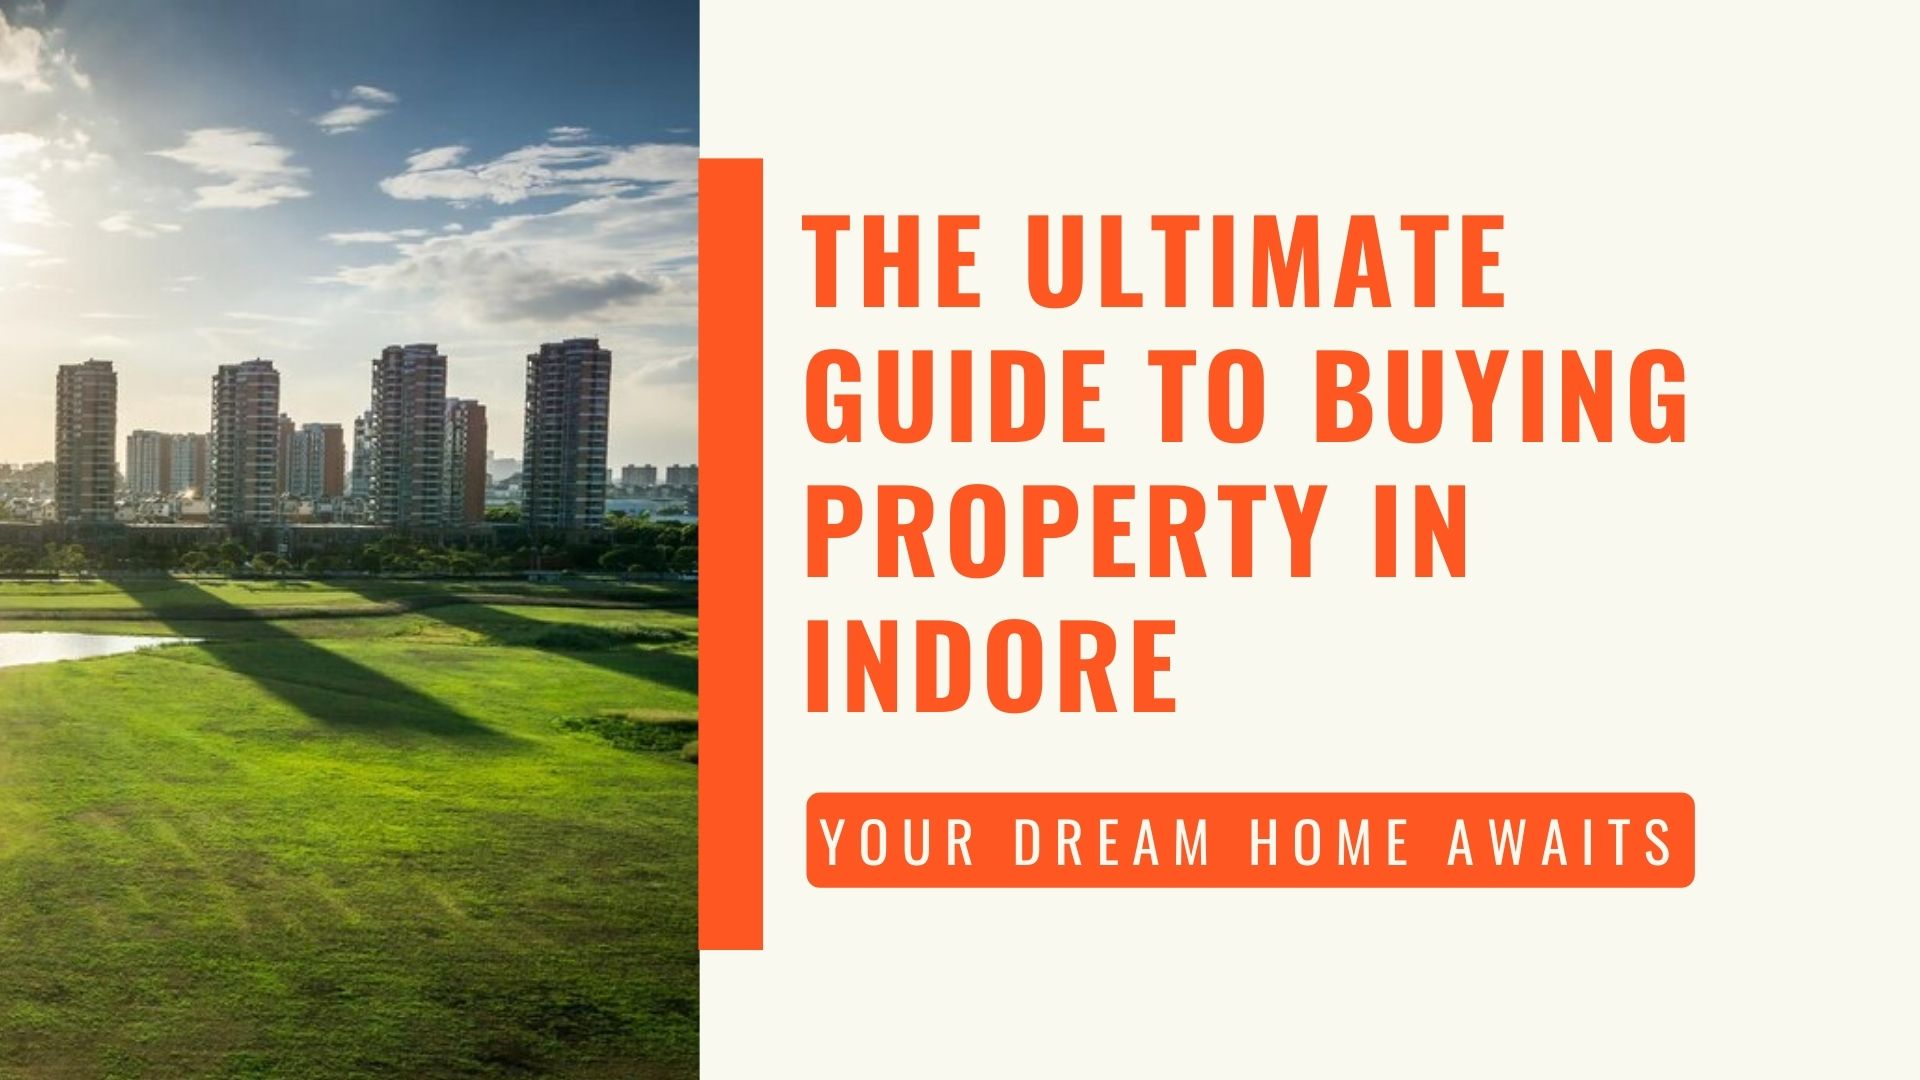 An image featuring a backdrop of buildings against a lush green landscape, overlaid with text reading 'The Ultimate Guide to Buying Property in Indore'